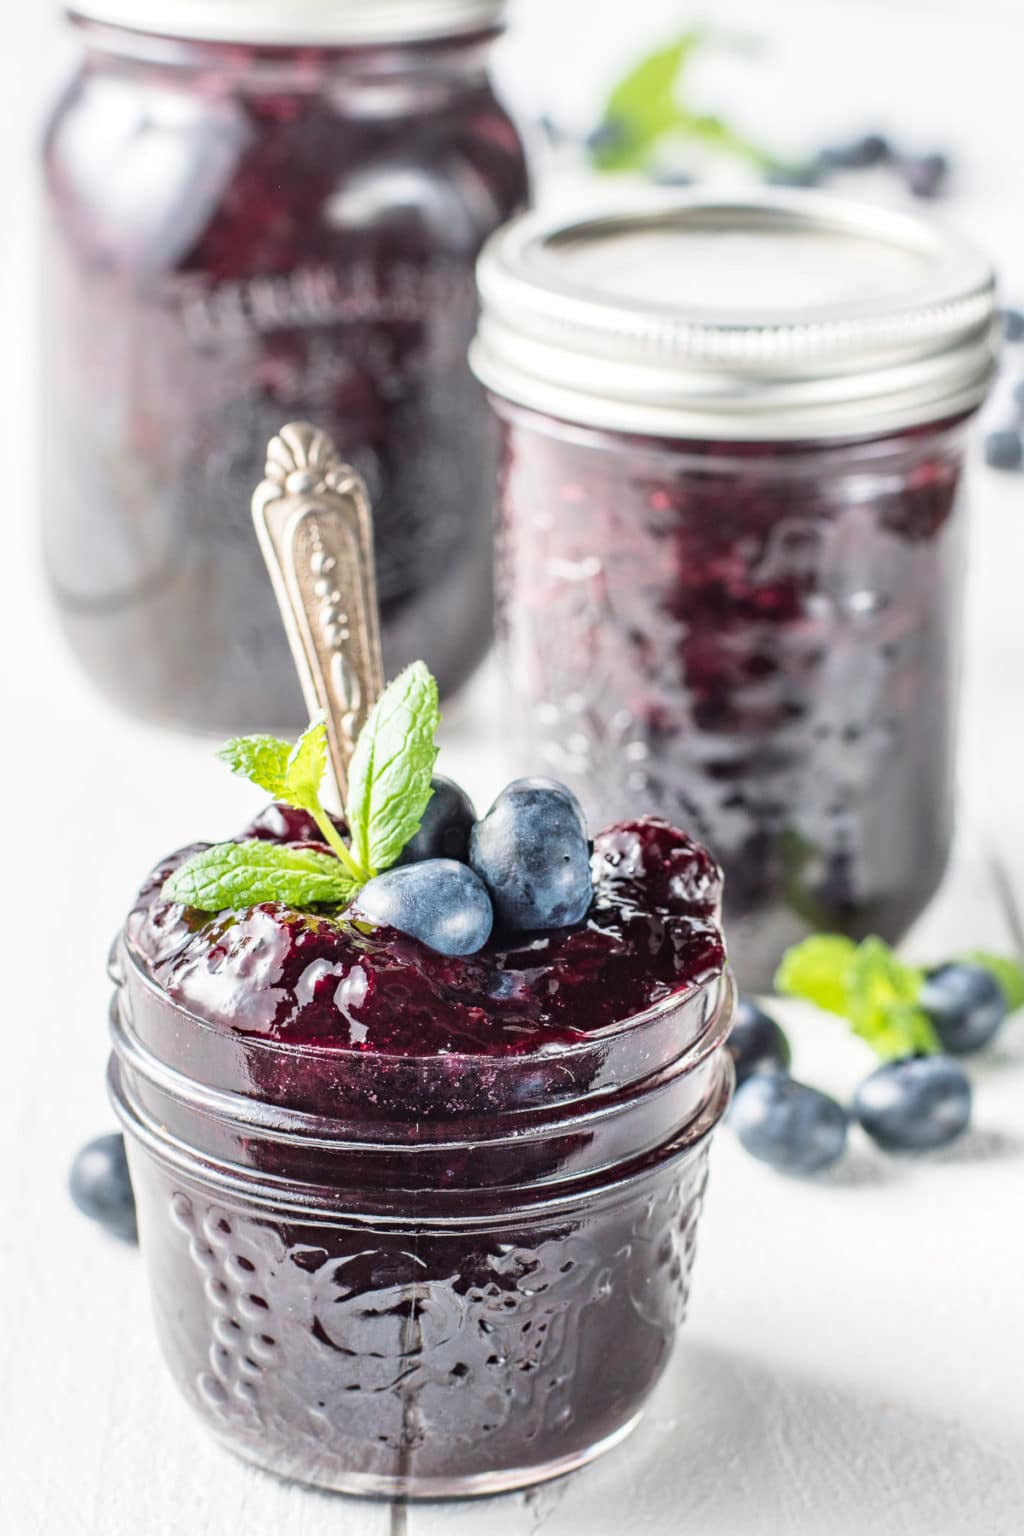 Jars of sugar-free blueberry jam on a white wooden board with sprigs of mint and scattered fresh blueberries